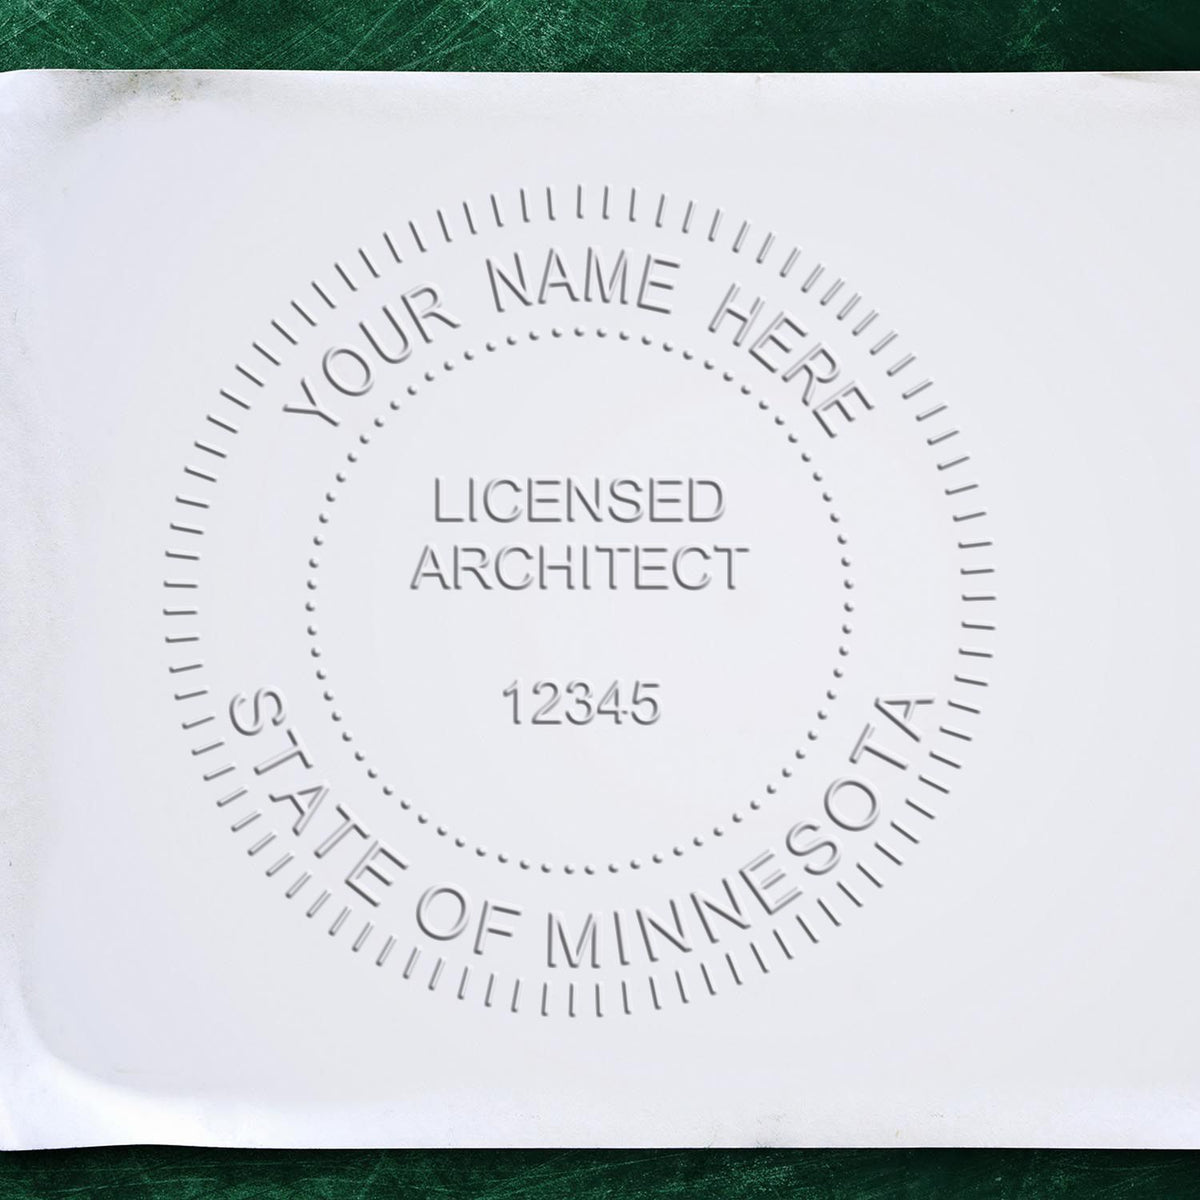 The State of Minnesota Architectural Seal Embosser stamp impression comes to life with a crisp, detailed photo on paper - showcasing true professional quality.